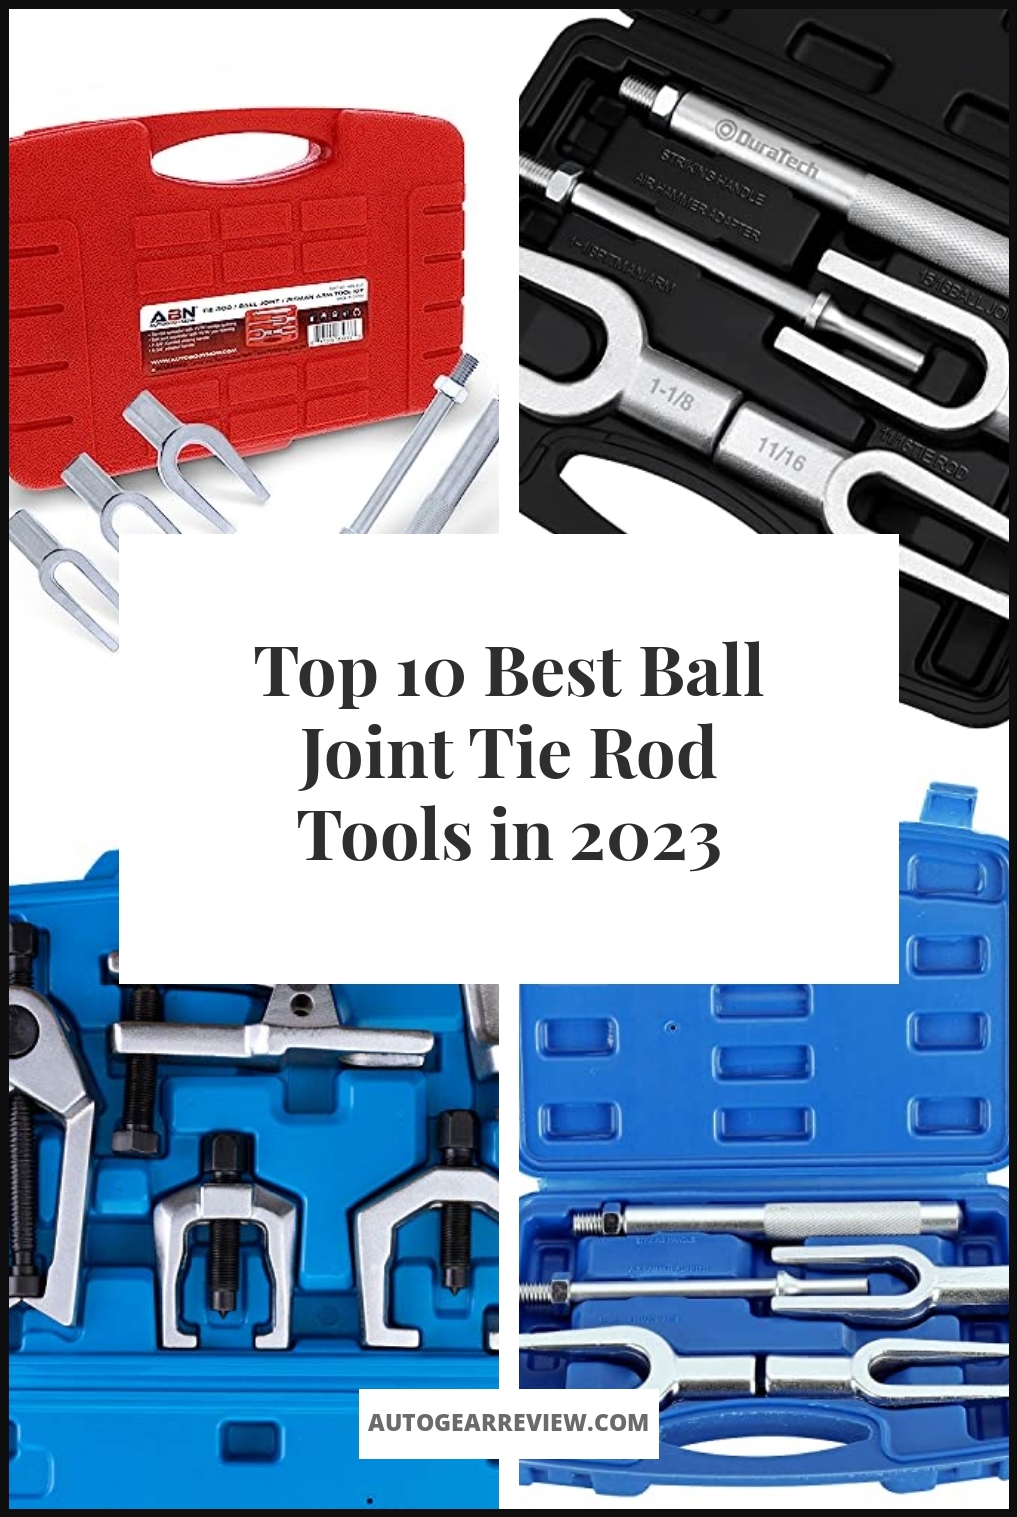 Best Ball Joint Tie Rod Tools - Buying Guide